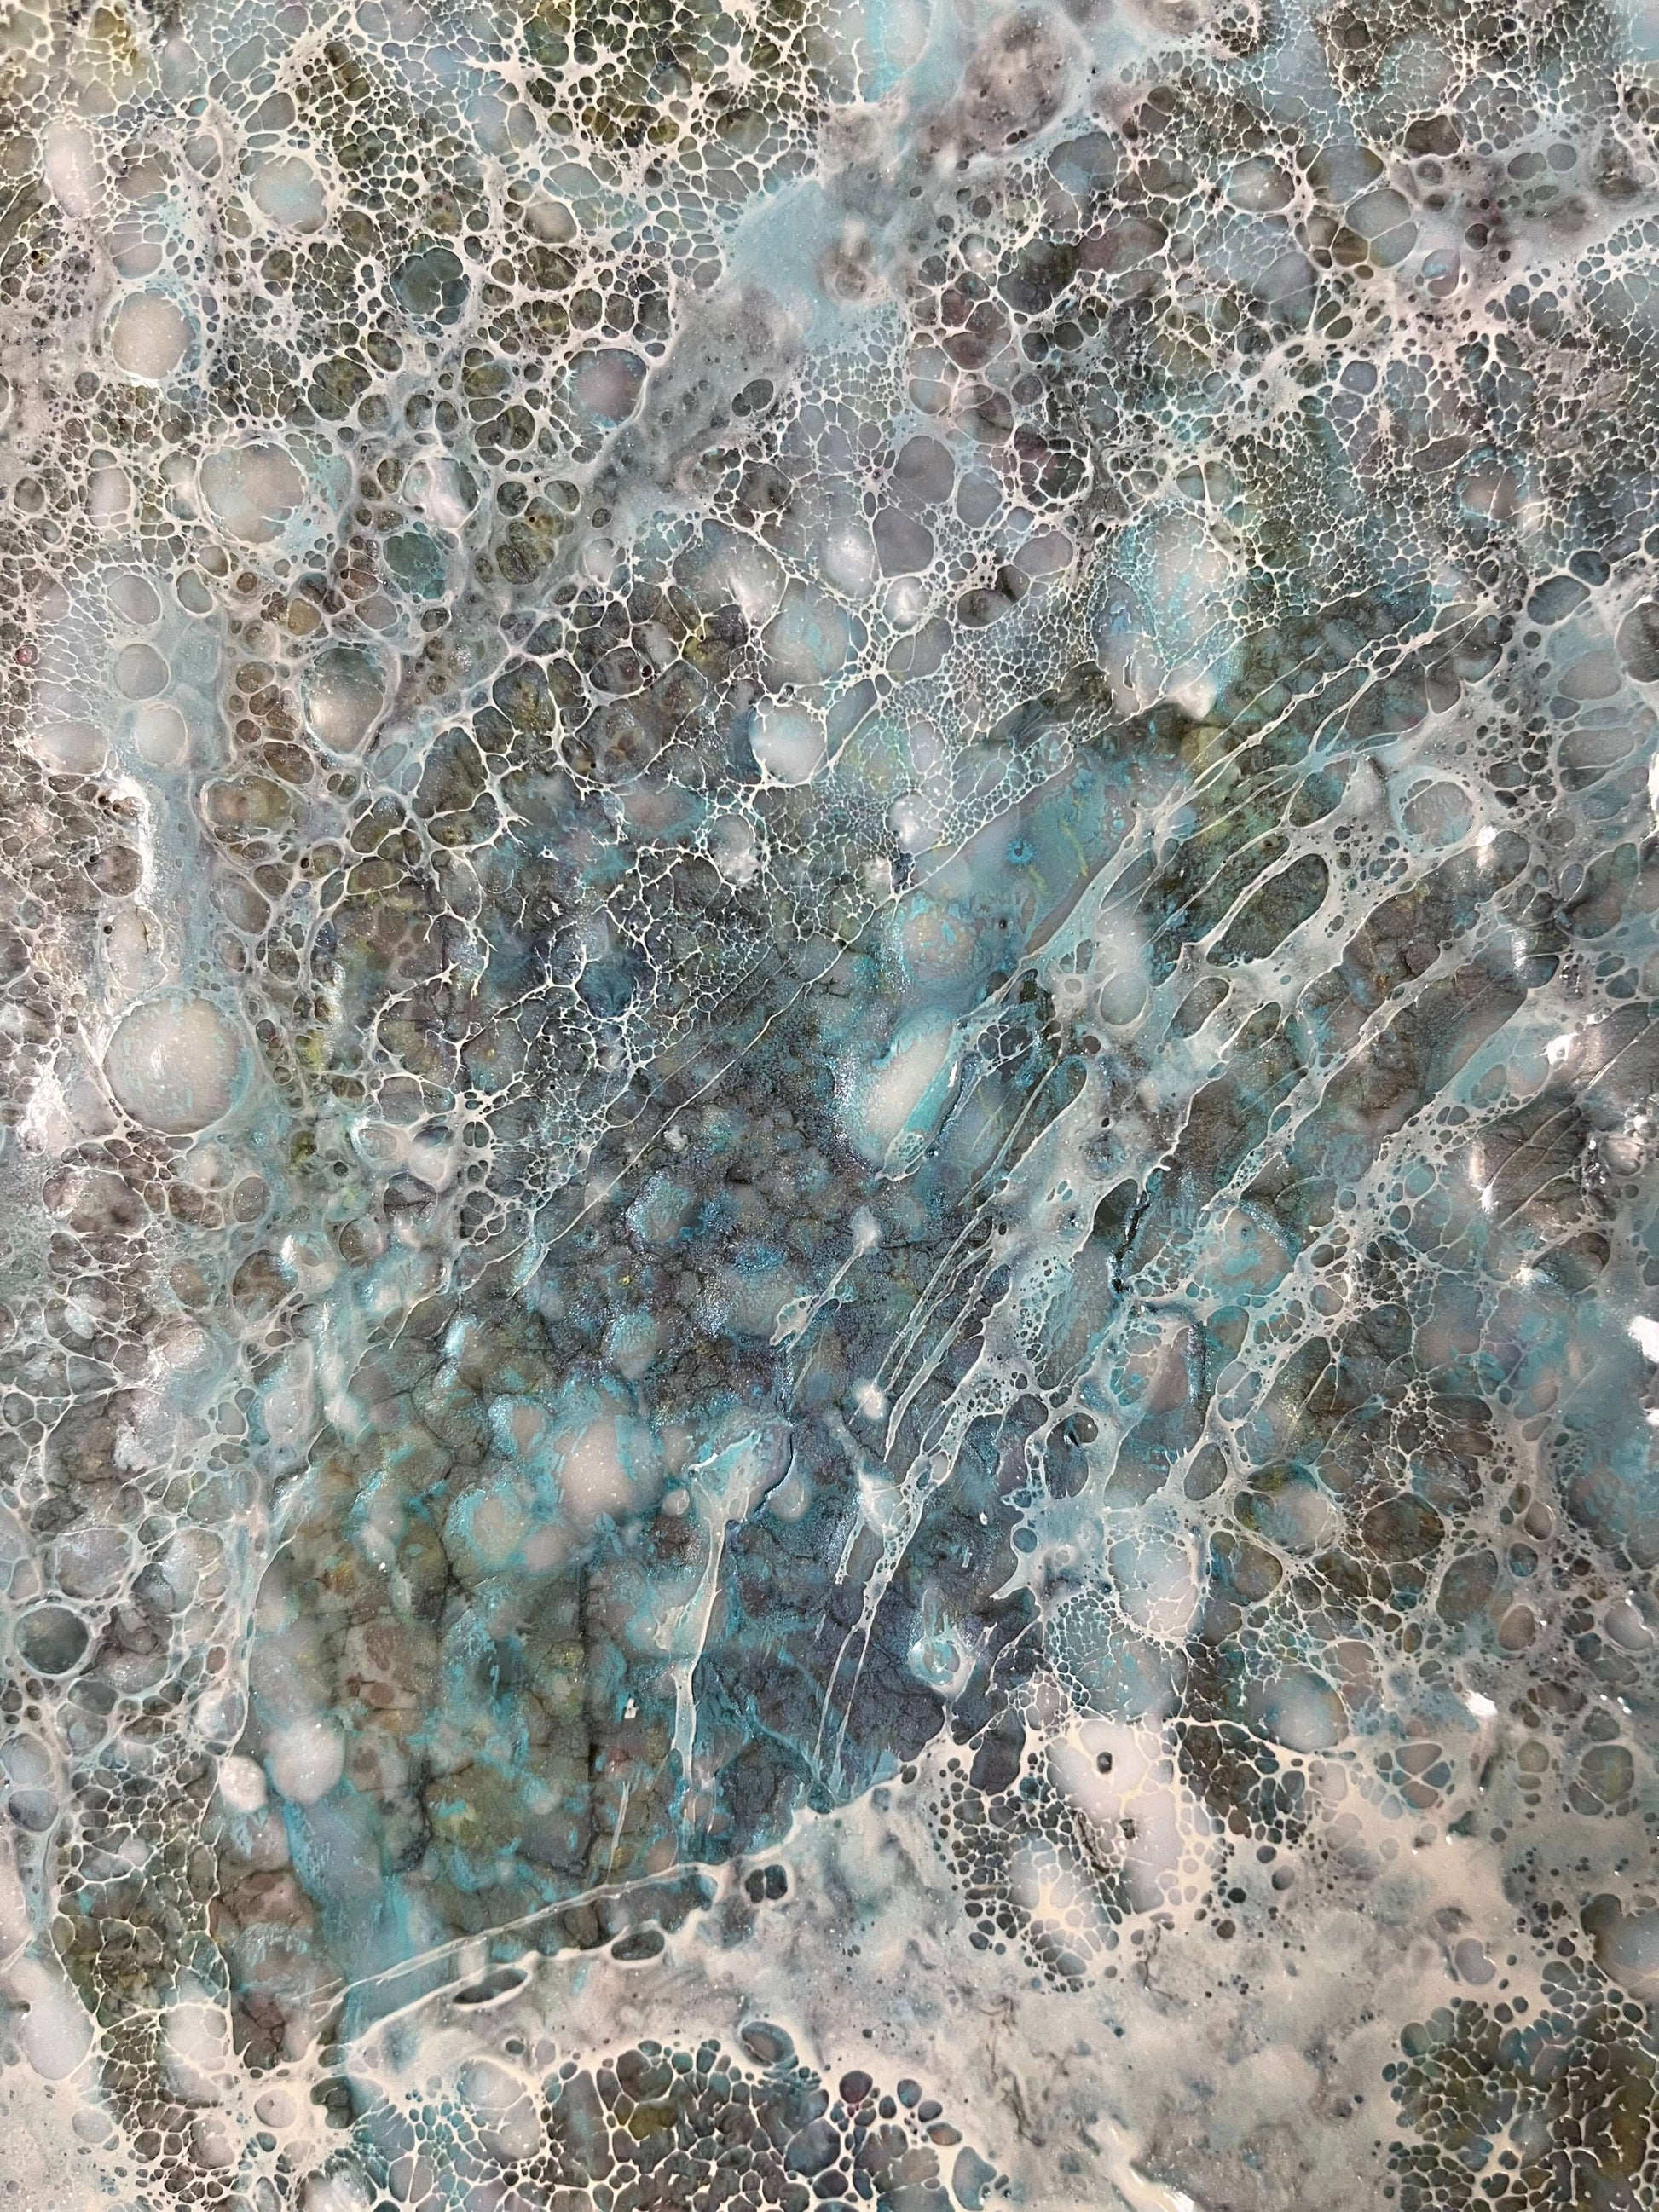 Close up.Abstract Encaustic Painting, 24x30n. Created with beeswax, damar resin, dry pigments and shellac on cradled wood panel. This painting has a very grounding feel to it. With its earthy colours of blue, green, brown and yellow. It is a calm piece with layers of intricate texture created by shellac burn technique. Hanging hardware is included